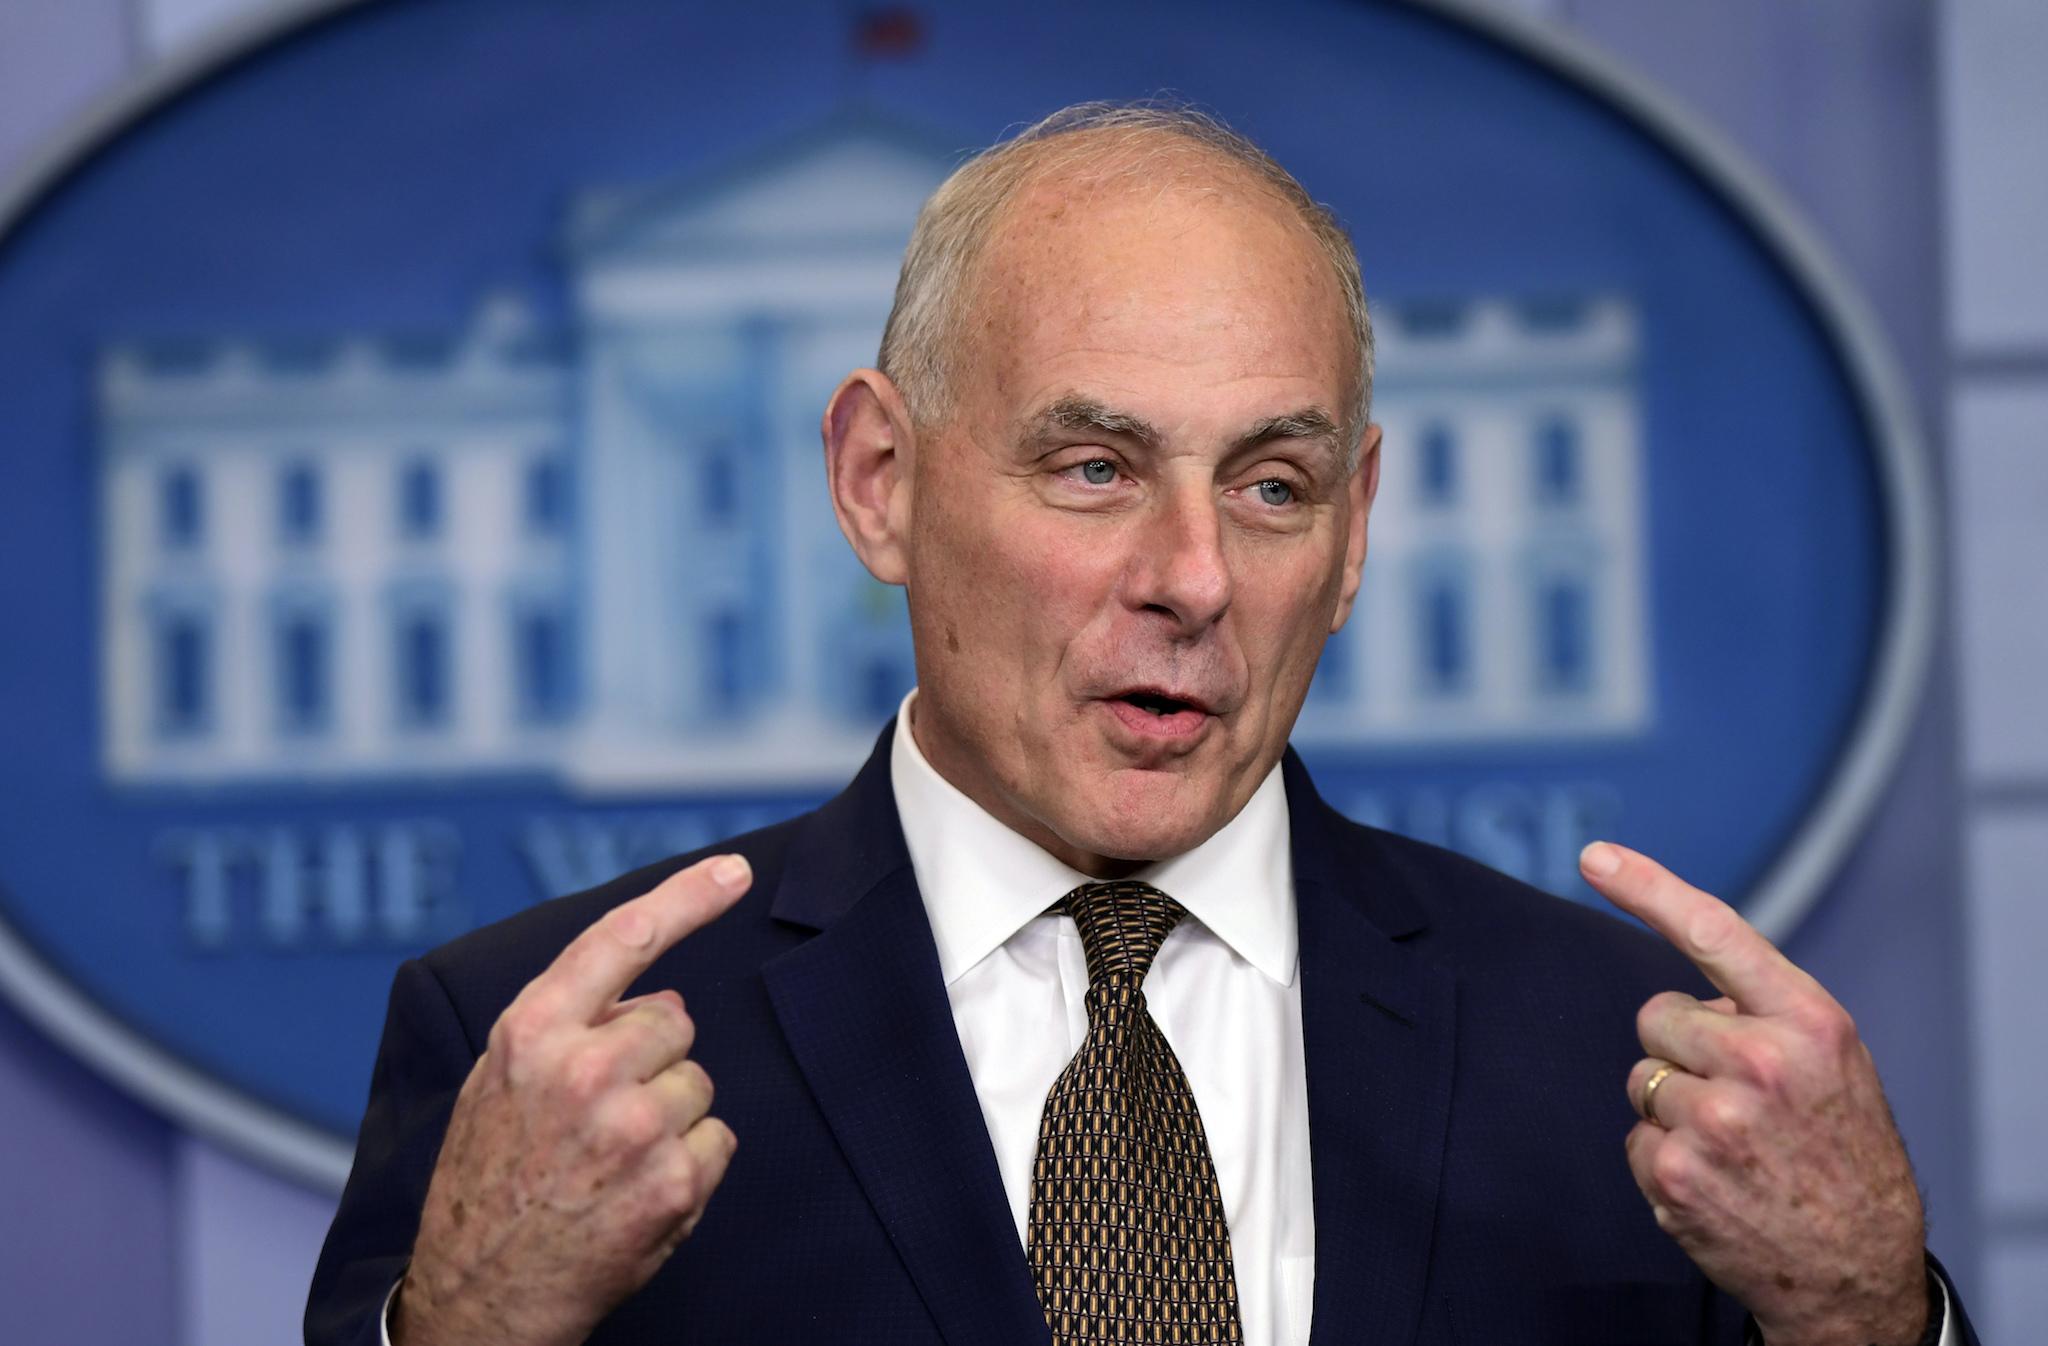 White House Chief of Staff John Kelly speaks during the daily briefing at the White House in Washington